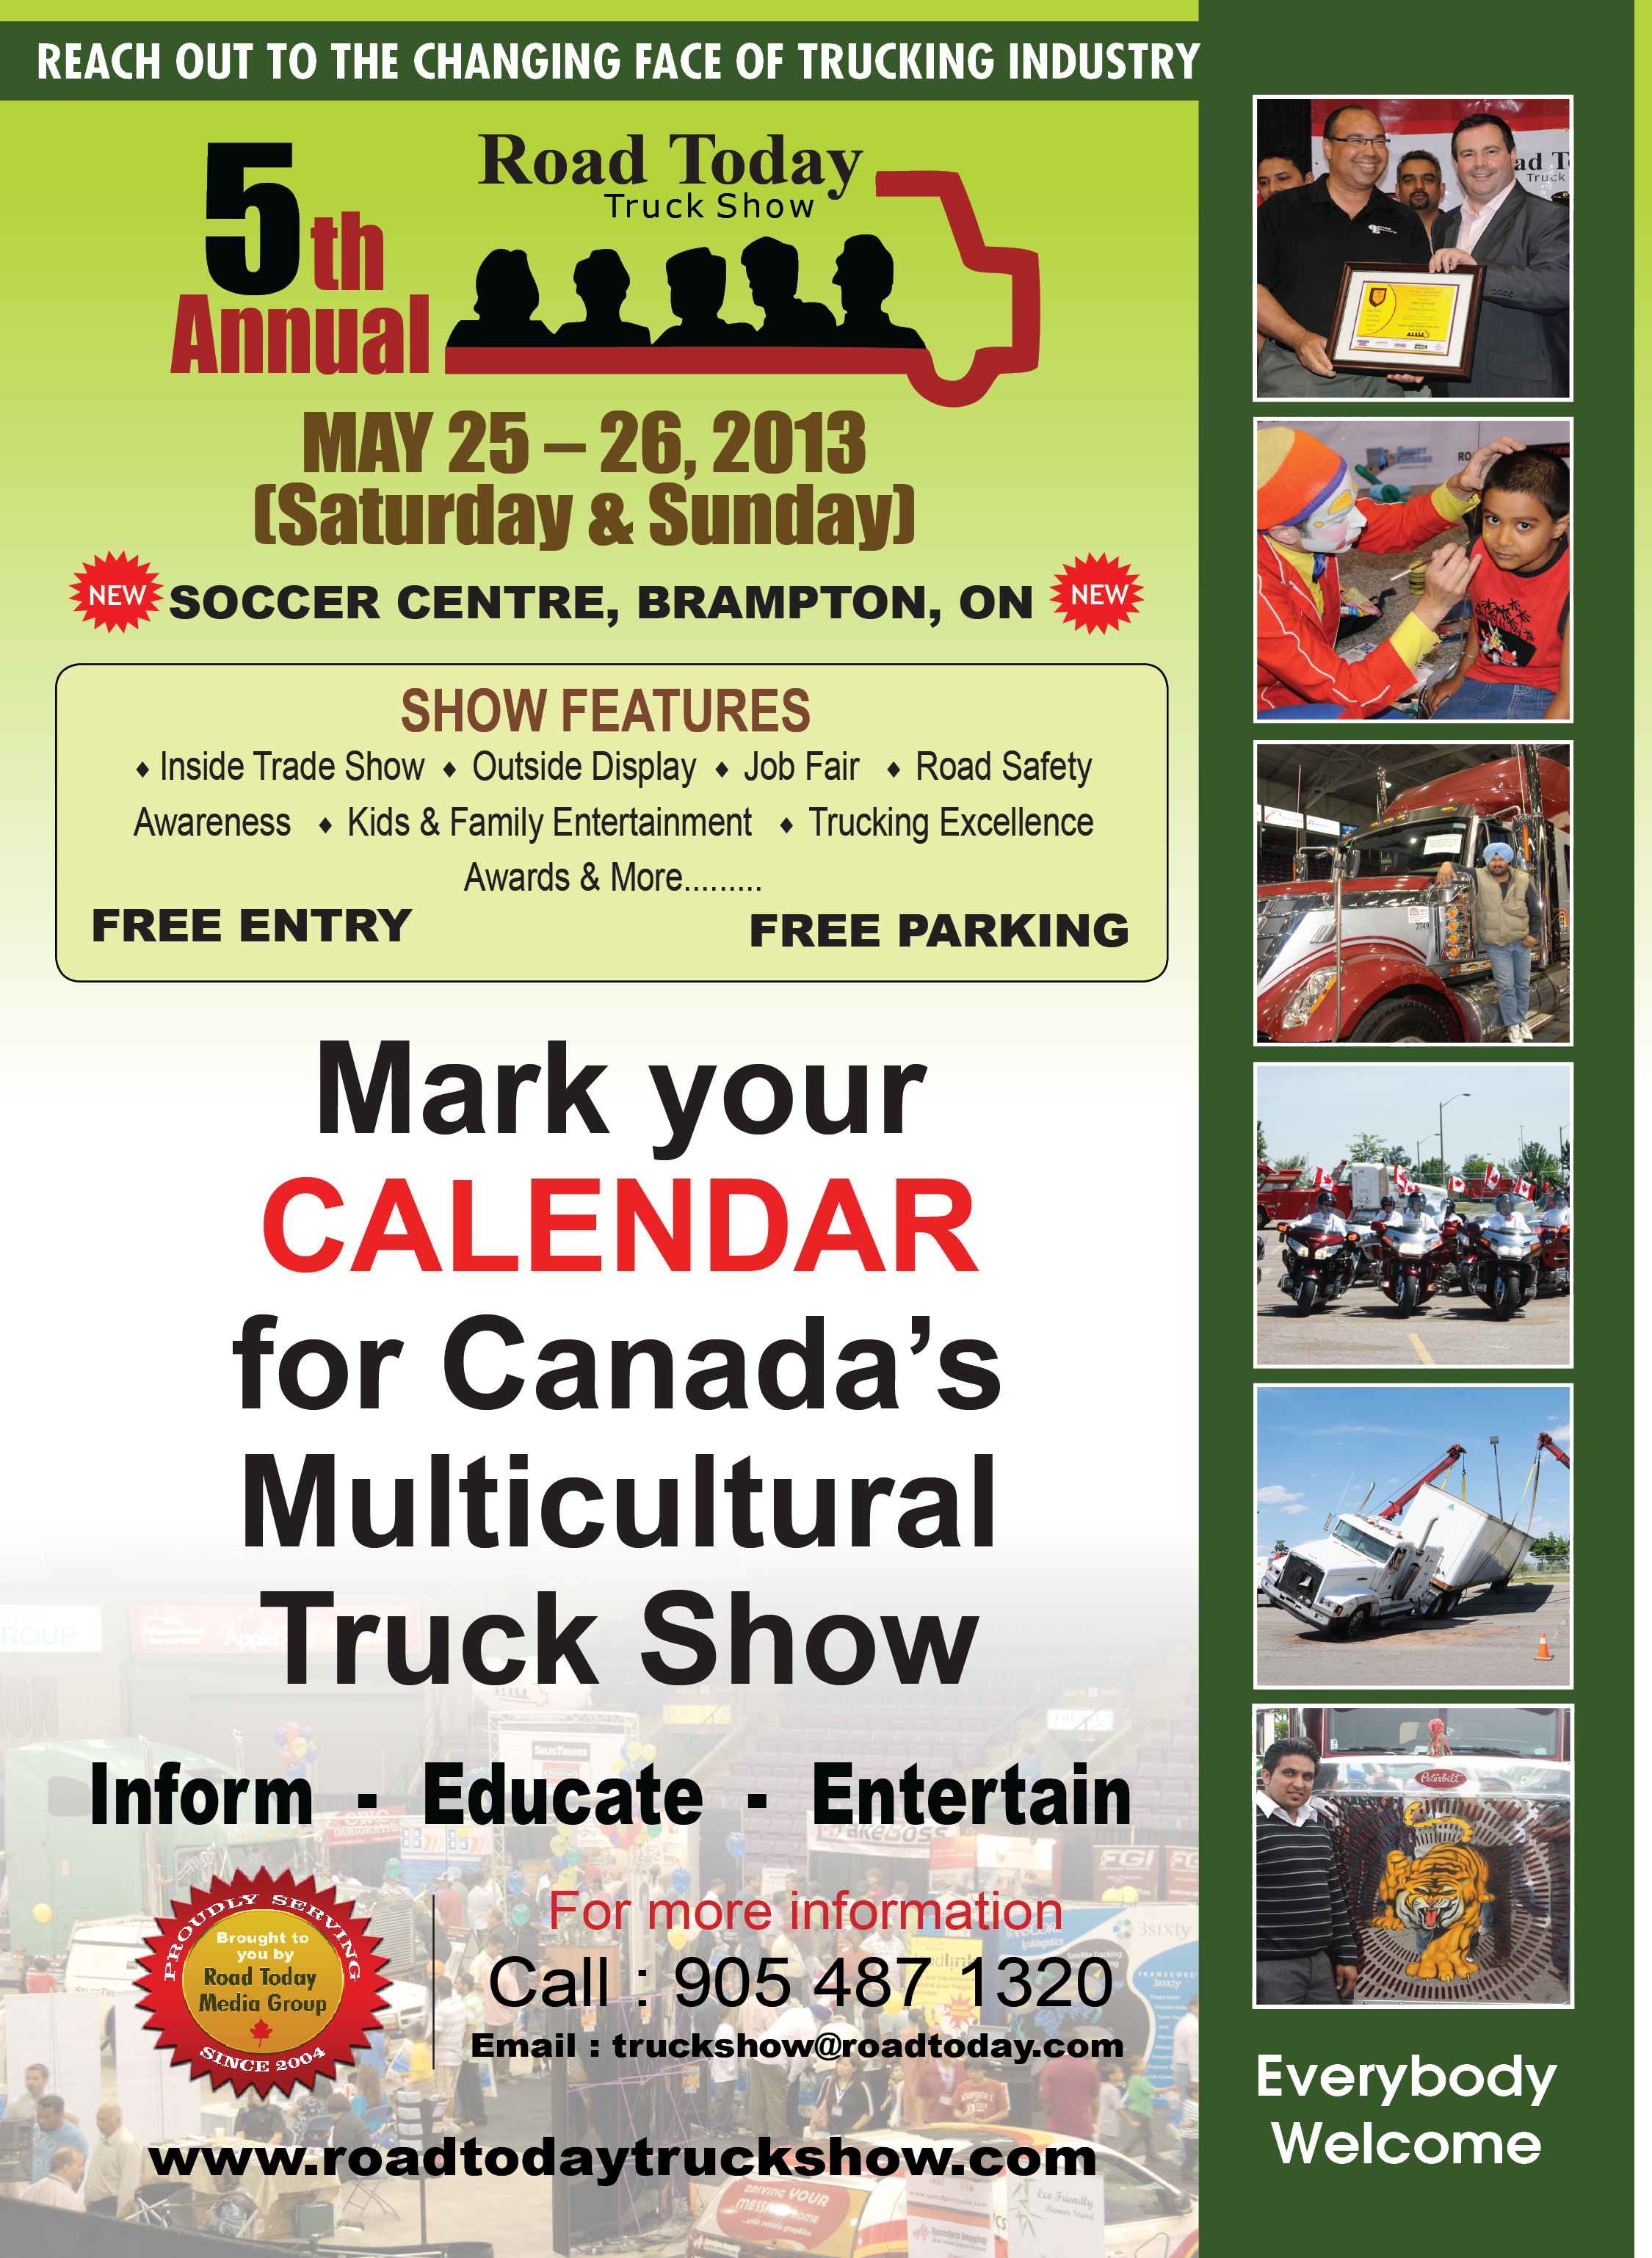 5th Annual Road Today Truck Show, May 25th-26th, Brampton